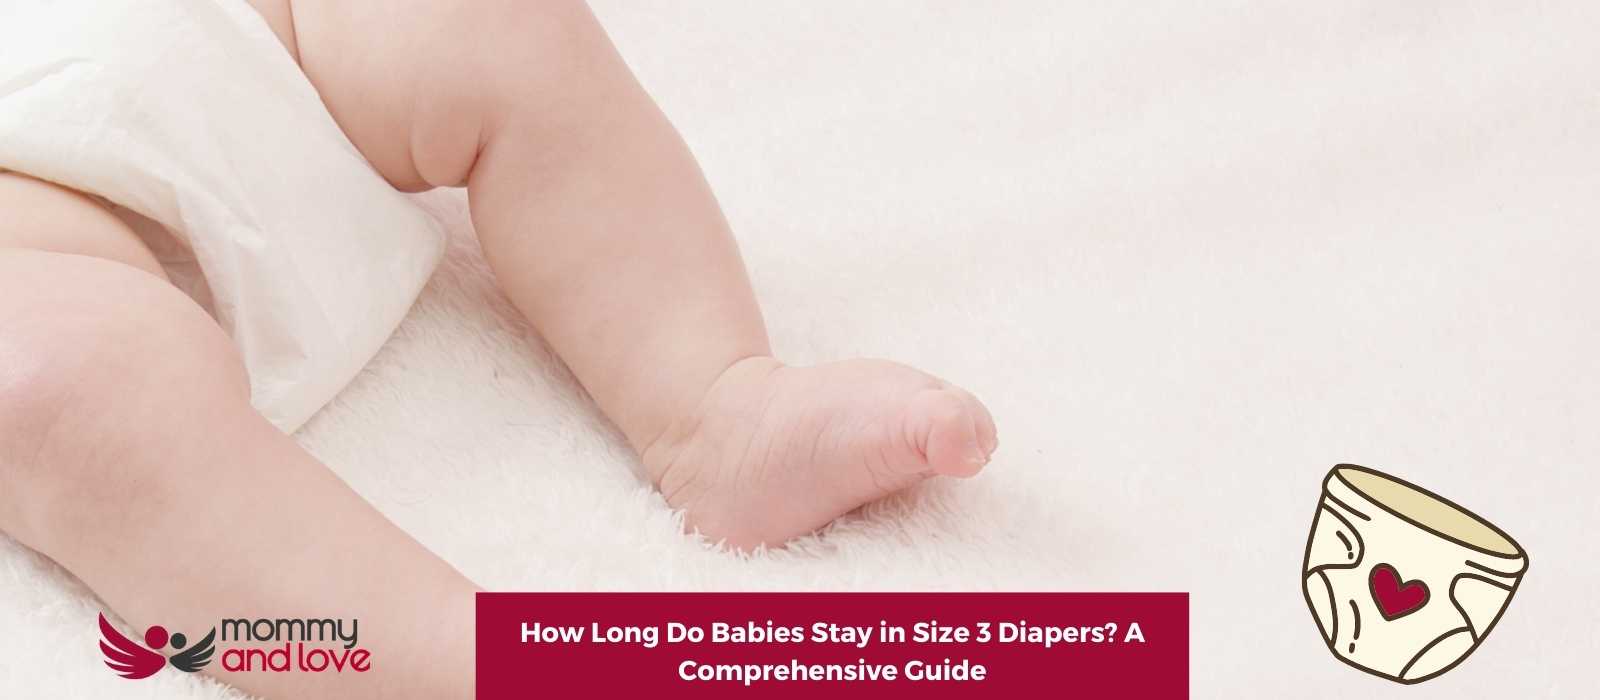 How Long Do Babies Stay in Size 3 Diapers A Comprehensive Guide